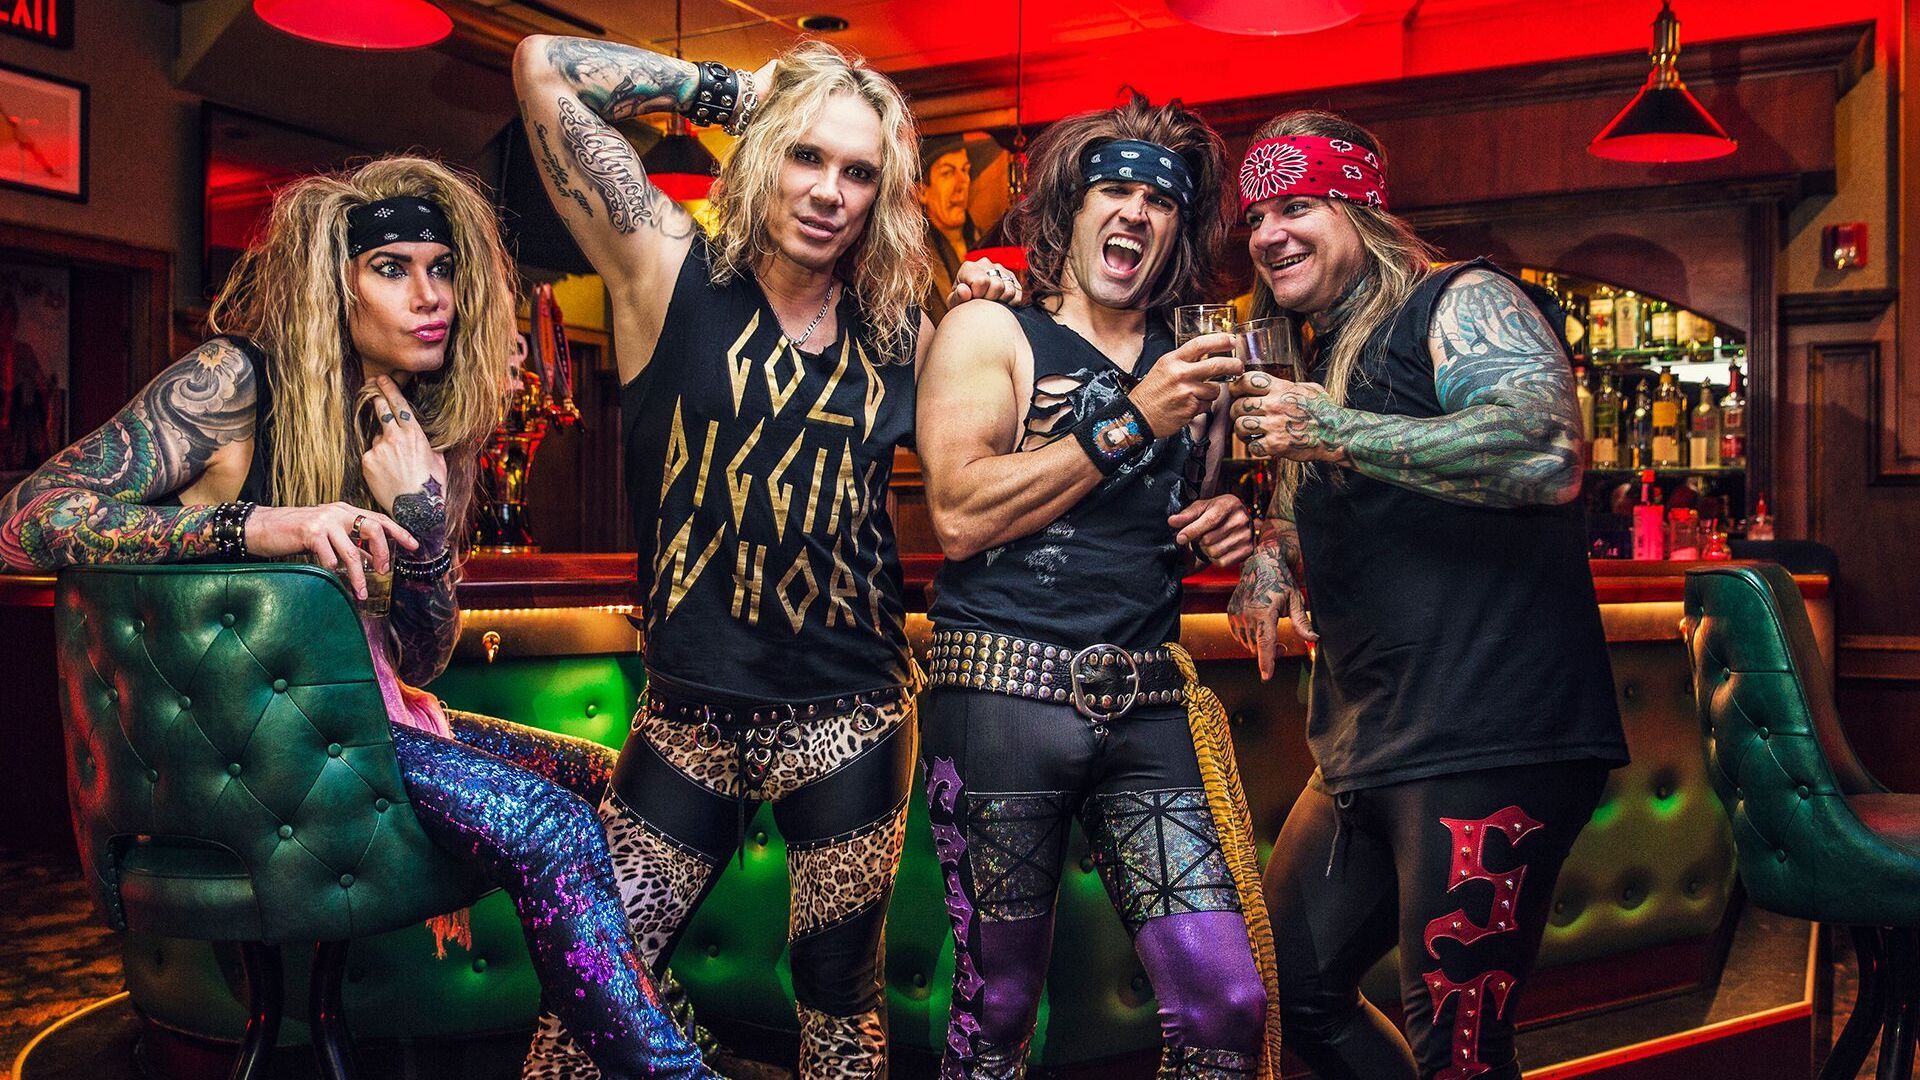 Steel Panther Announce New Album 'Lower The Bar', Drop Sexified